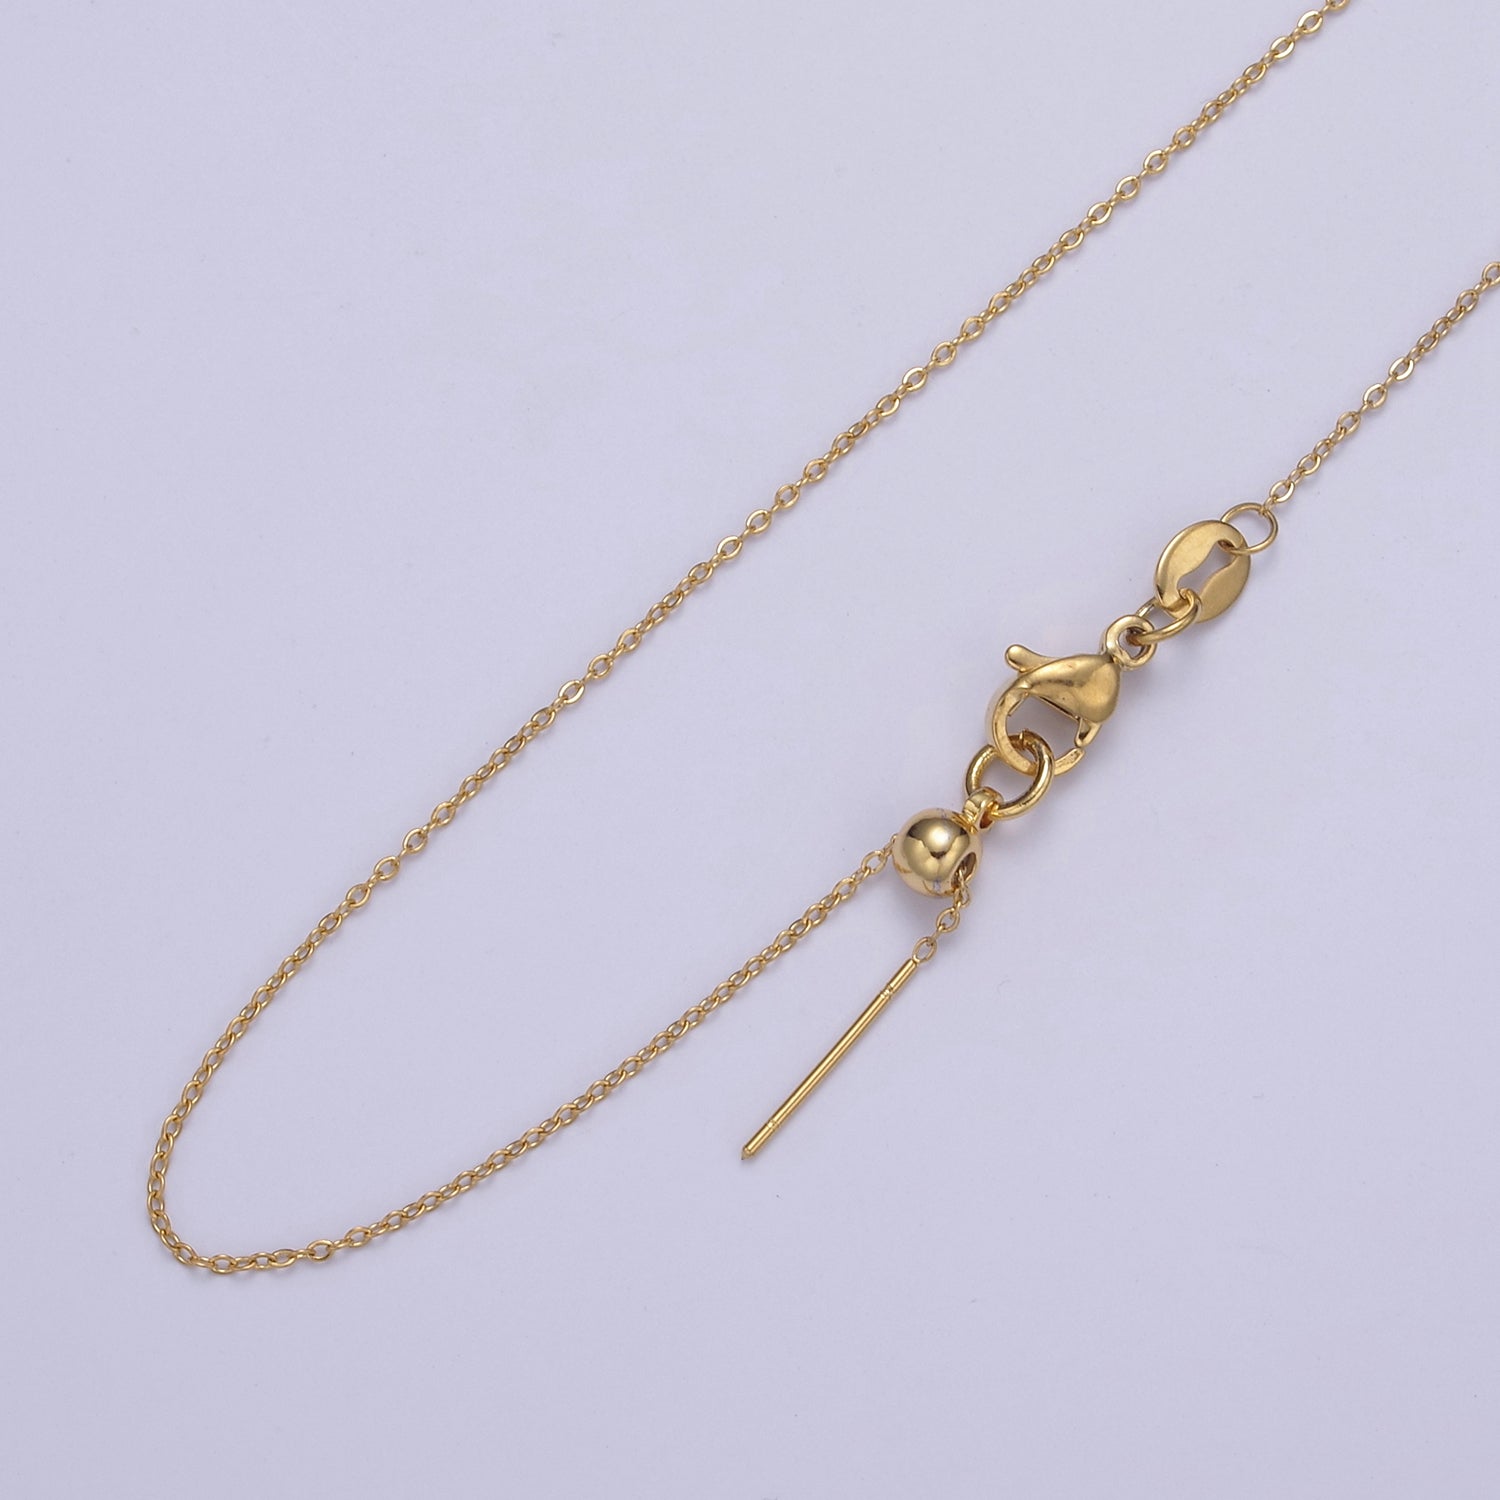 Fine 14k Gold Filled Chain Necklace, Adjustable Gold Chain, Fine Cable Link Neck Chain, Thin Simple Layering Chain 19" long wa-735 - DLUXCA